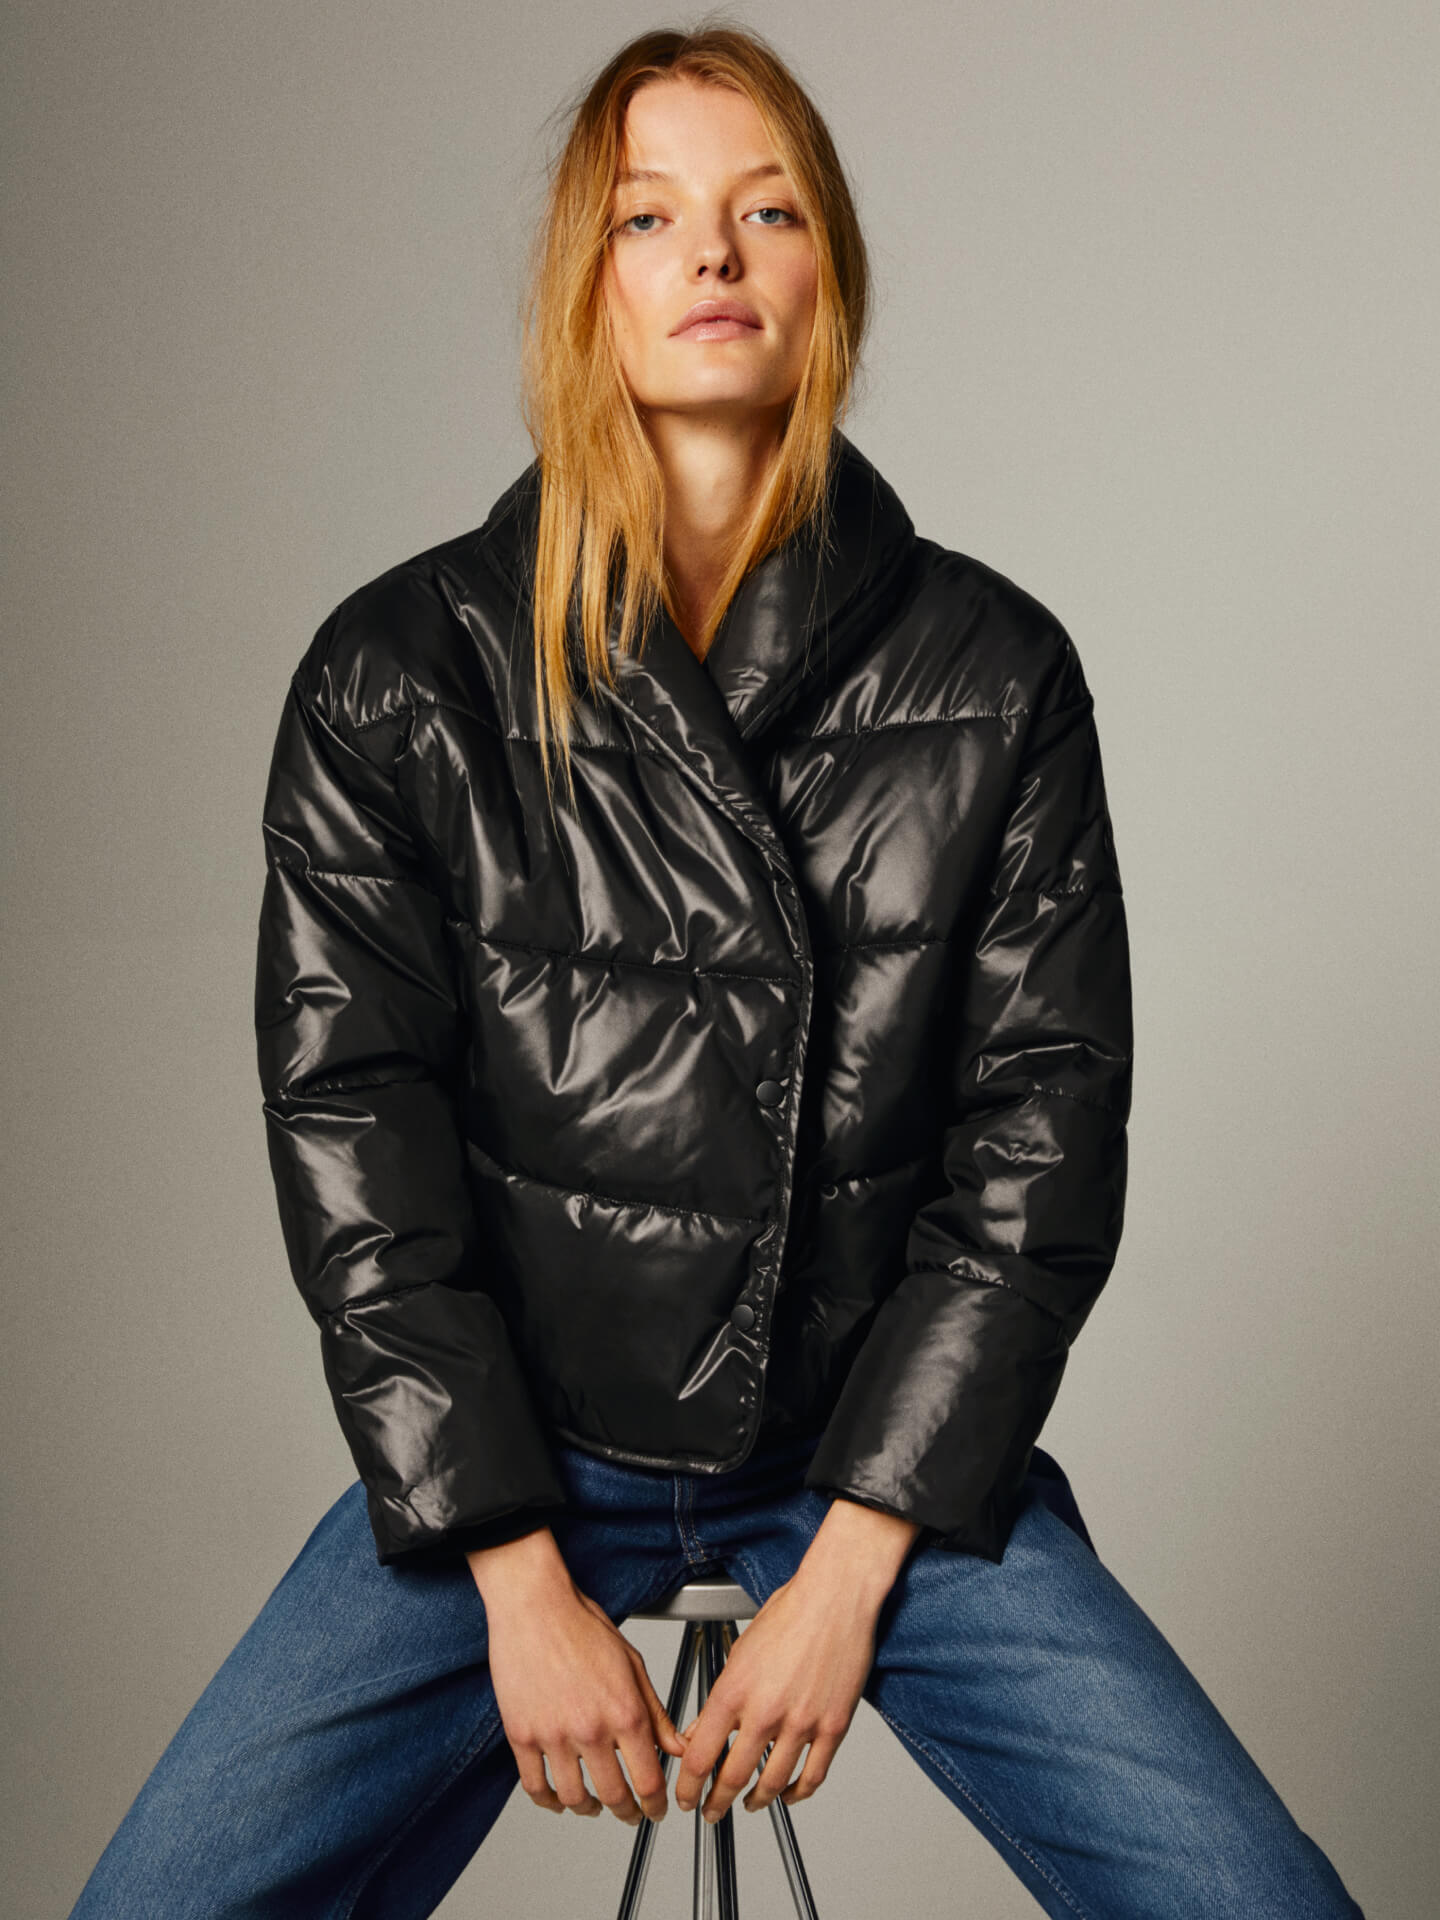 Pepe Jeans London - Official Website United Kingdom